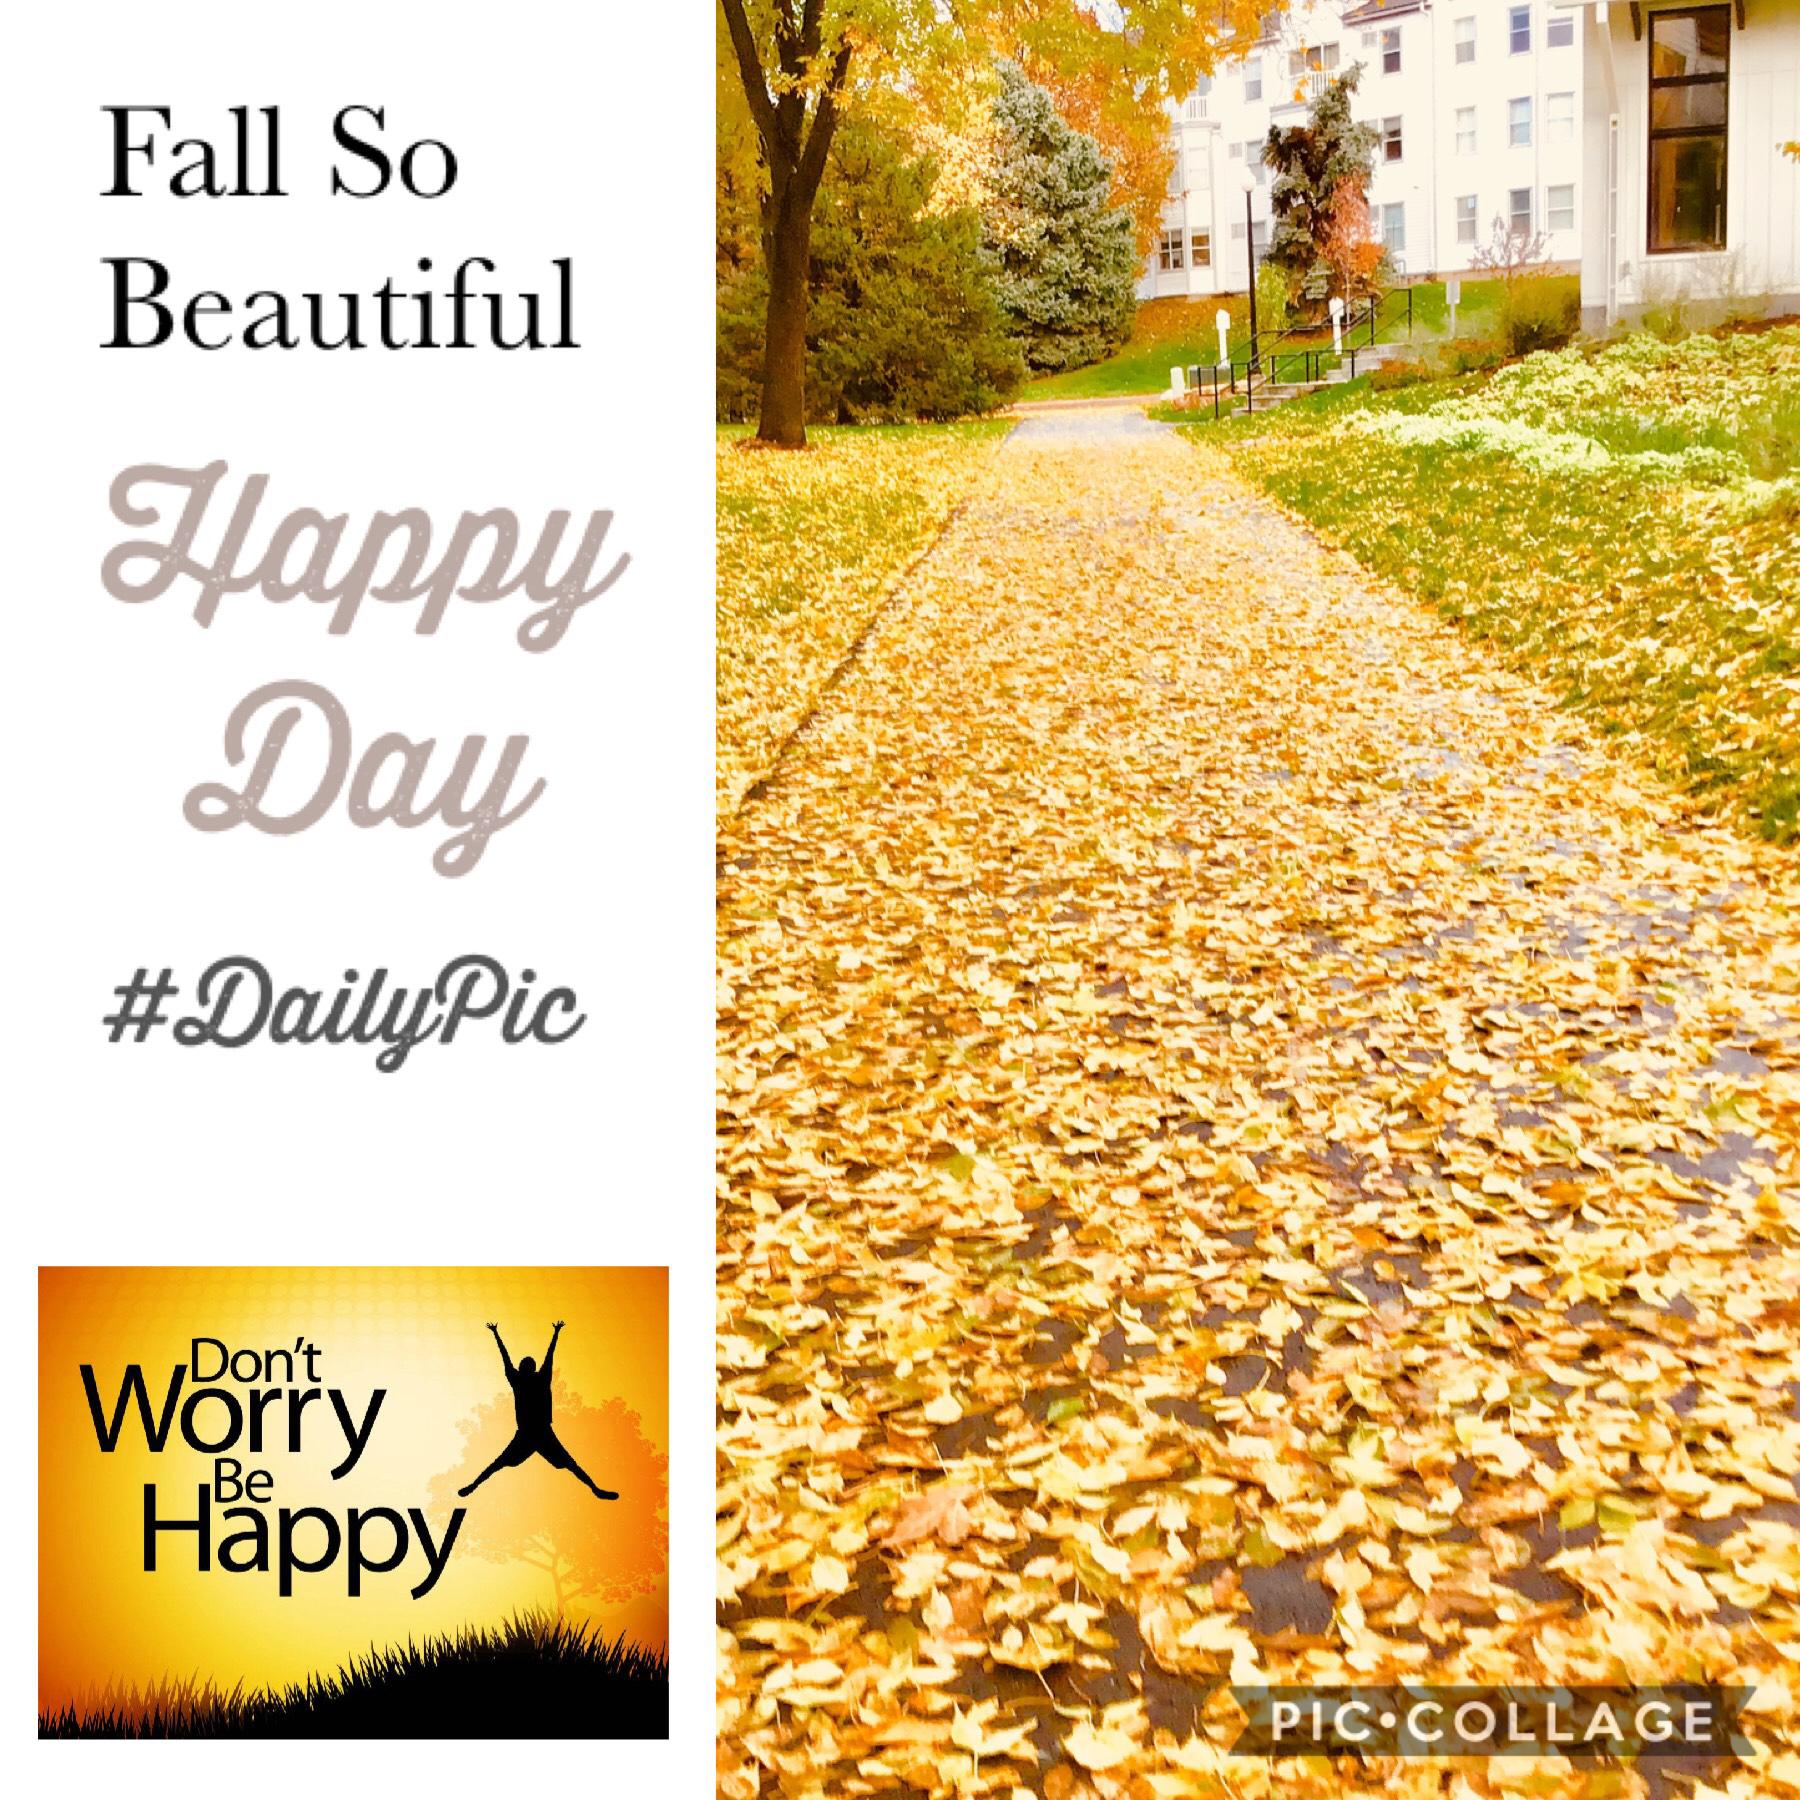 Happy day for fall